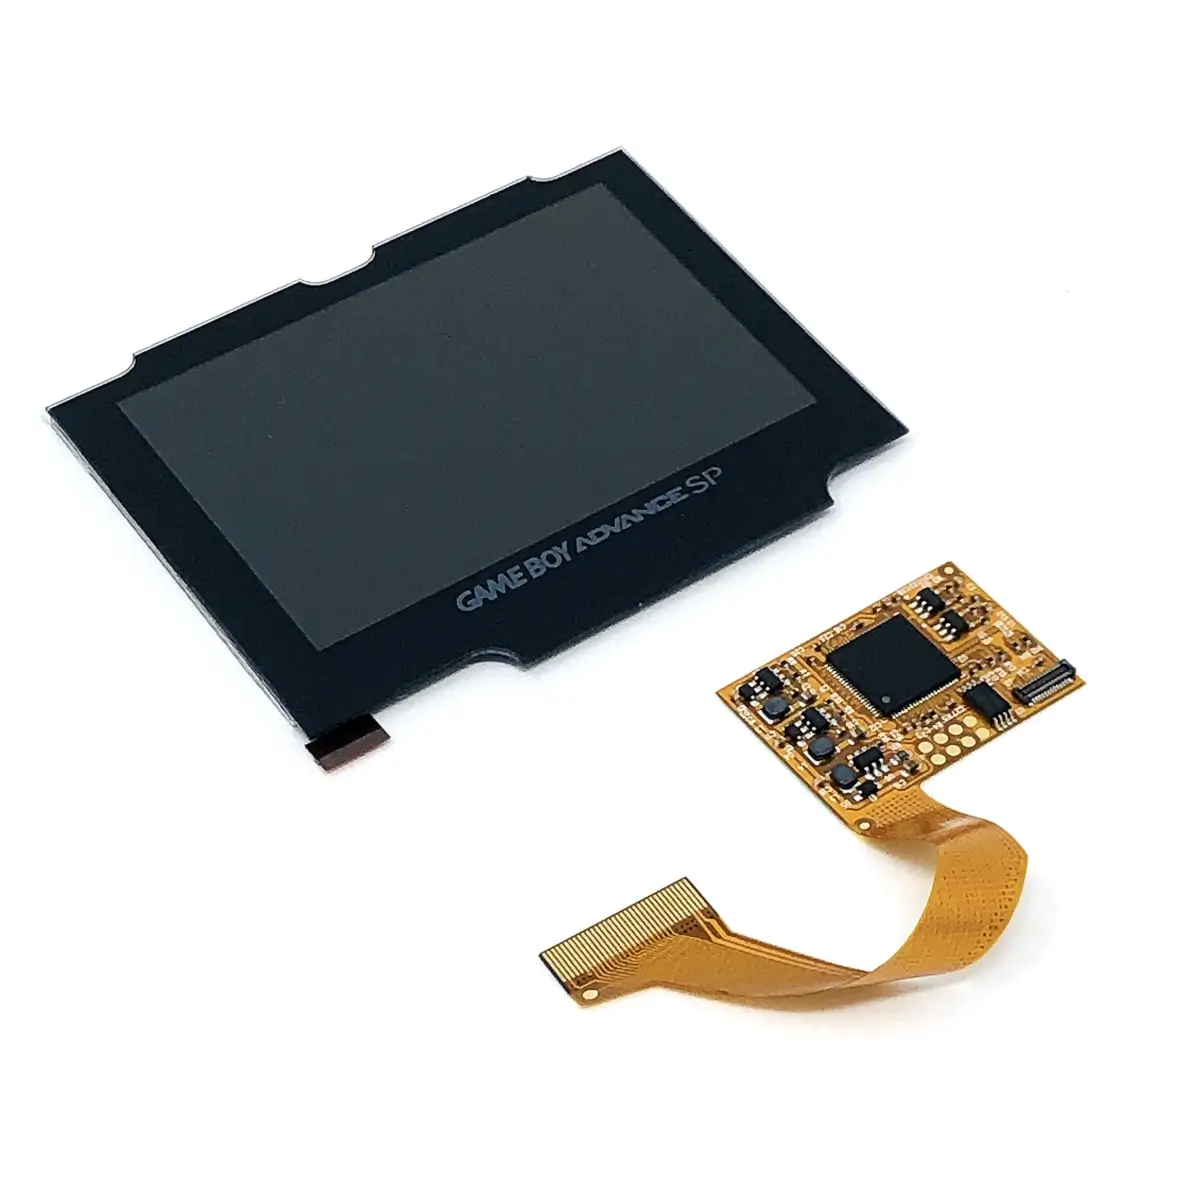 Gameboy Advance SP screen replacement